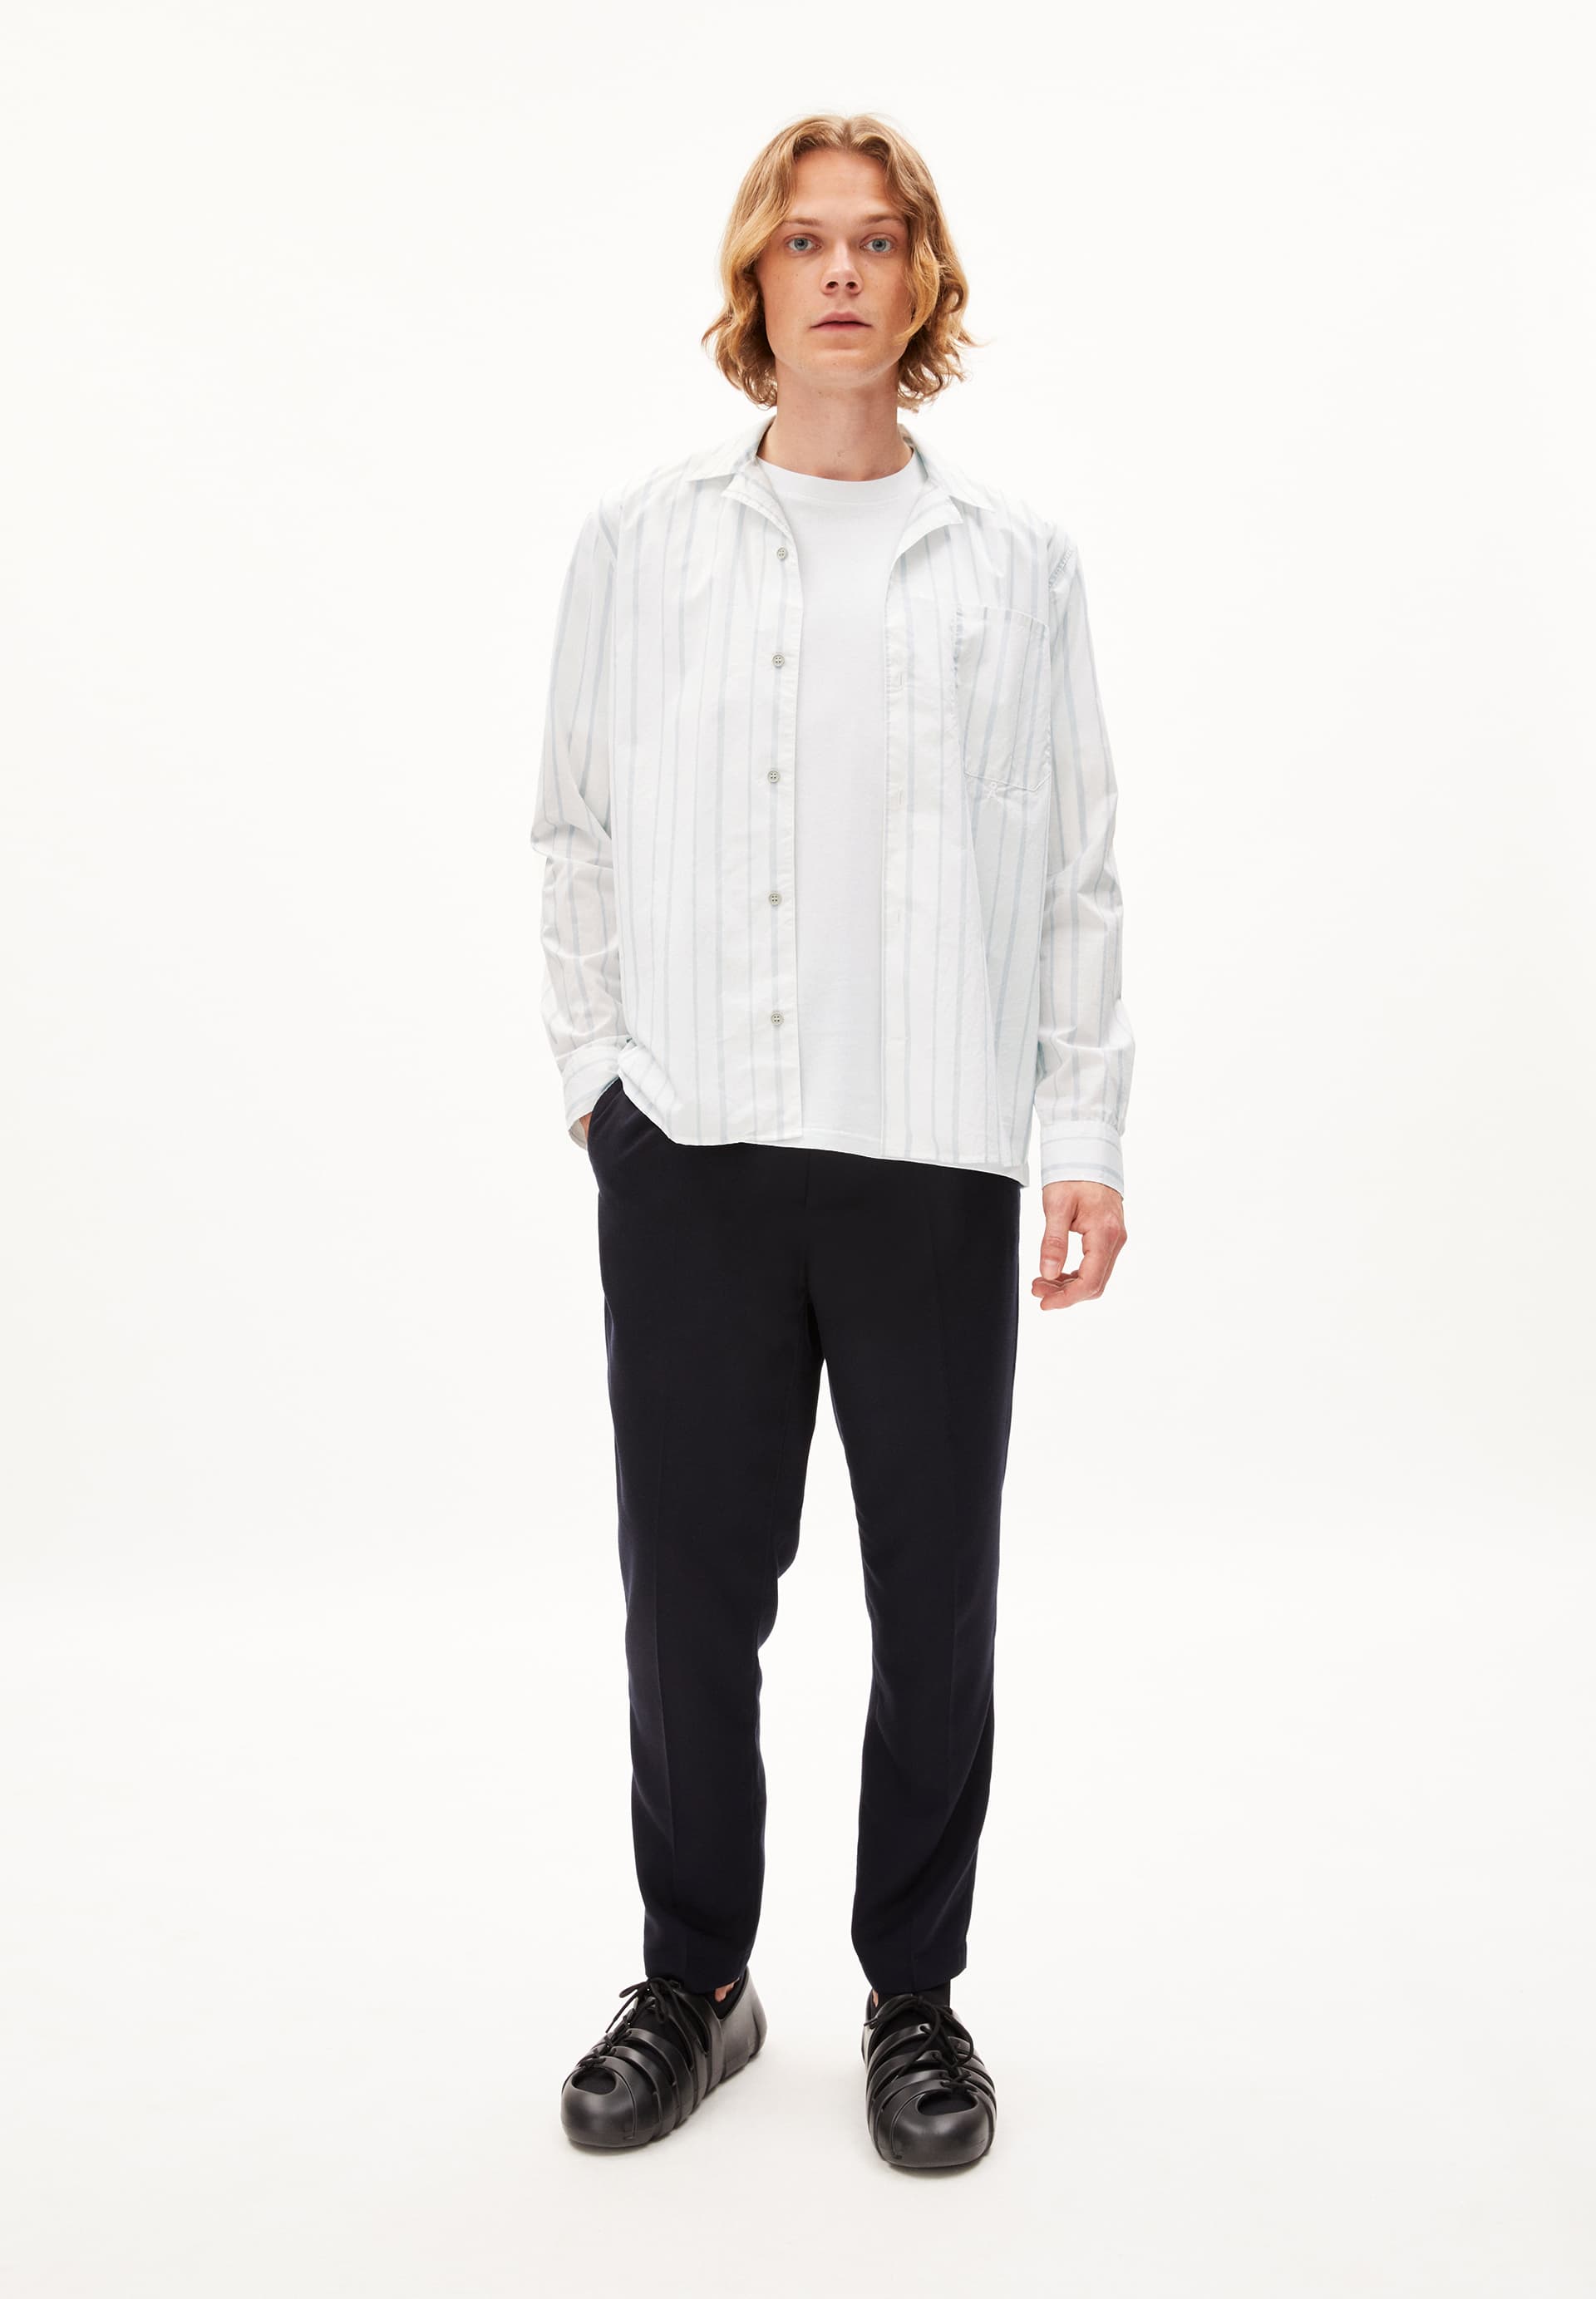 RONDAA Shirt Relaxed Fit made of Organic Cotton